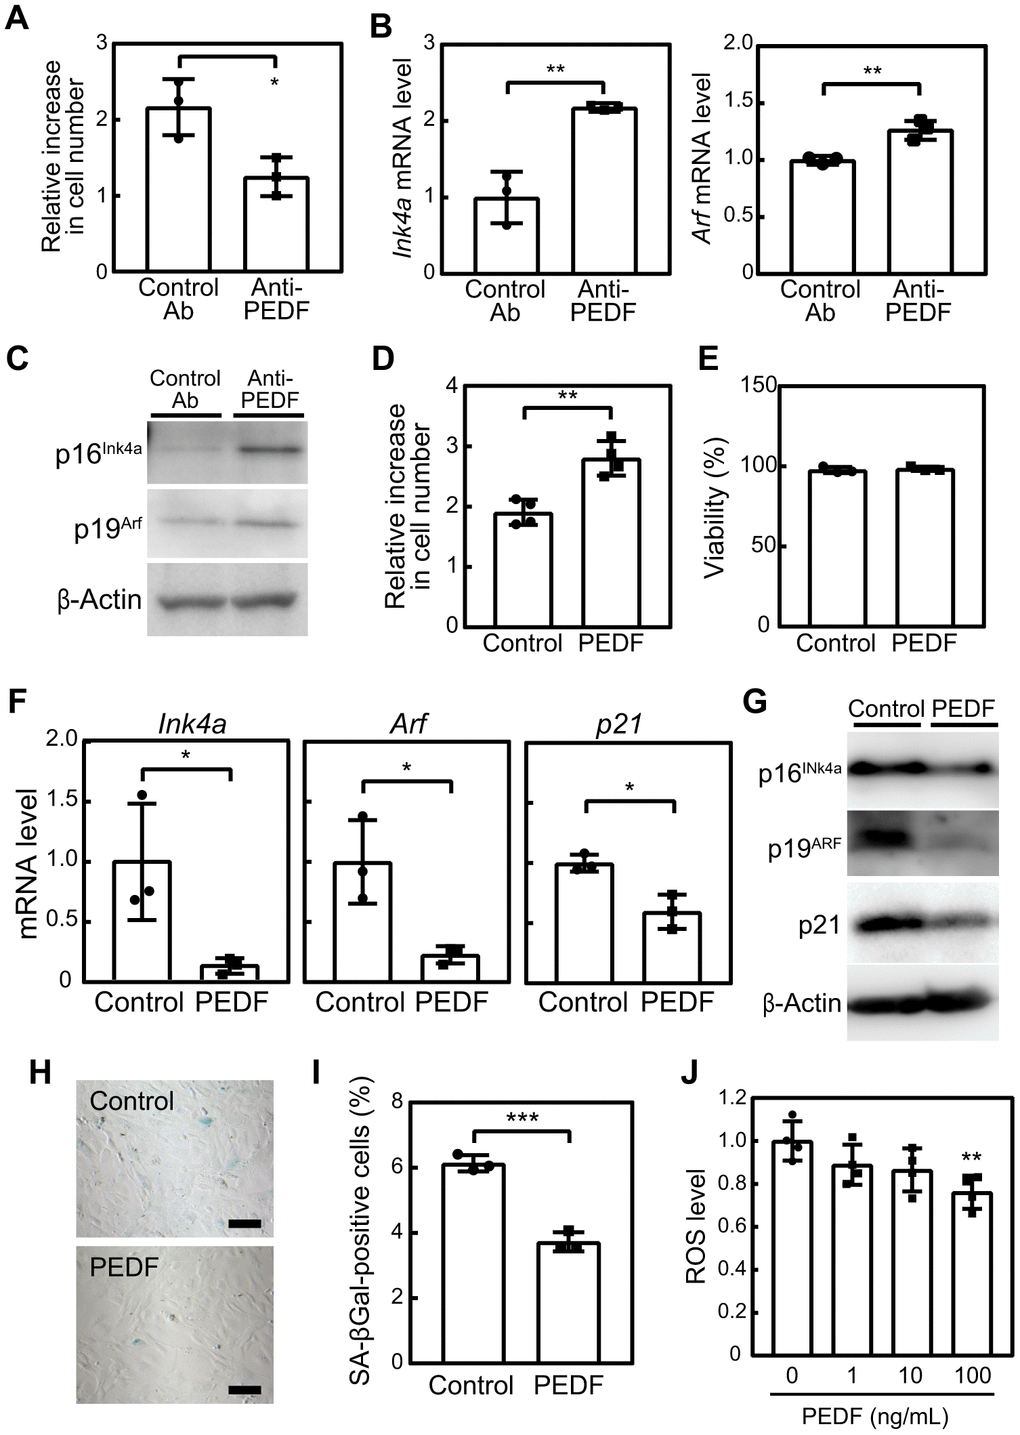 PEDF mediates the anti-cellular senescence effects of C2C12-CM. (A–C) MEFs were cultured in the presence of C2C12-CM treated with a control or PEDF antibody for 3 days. (A) Cell numbers were counted and relative changes in cell numbers in 3 days were plotted. (B) Total RNA was isolated from MEFs and the expression of Ink4a and Arf was analyzed by real-time PCR. Values were normalized to Gapdh in each sample. (C) p16INK4a and p19ARF levels were analyzed by immunoblotting. β-Actin was used as the loading control. (D) MEFs were cultured in the presence of a recombinant of PEDF (100 ng/mL) for 3 days. Changes in cell numbers were plotted. (E) Cell viability was determined by the trypan blue exclusion assay. (F) The expression of Ink4a, Arf, and p21 was analyzed by real-time PCR. Values were normalized to Gapdh in each sample. (G) p16INK4a, p19ARF, and p21 levels were analyzed by immunoblotting. β-Actin was used as a loading control. (H) Cells were stained for SA-β-gal. Scale bar, 100 μm. (I) The percentage of SA-β-gal-positive cells was plotted. (J) Cells were stimulated with the indicated concentrations of recombinant PEDF for 3 days. Intracellular ROS levels were analyzed in each sample, and relative values were plotted against the average of the control sample. Values represent means ± SD. Data were analyzed by the Student’s t-test (A, B, D–F, I) or a one-way ANOVA and Tukey’s post-hoc analysis (J). *P P P 